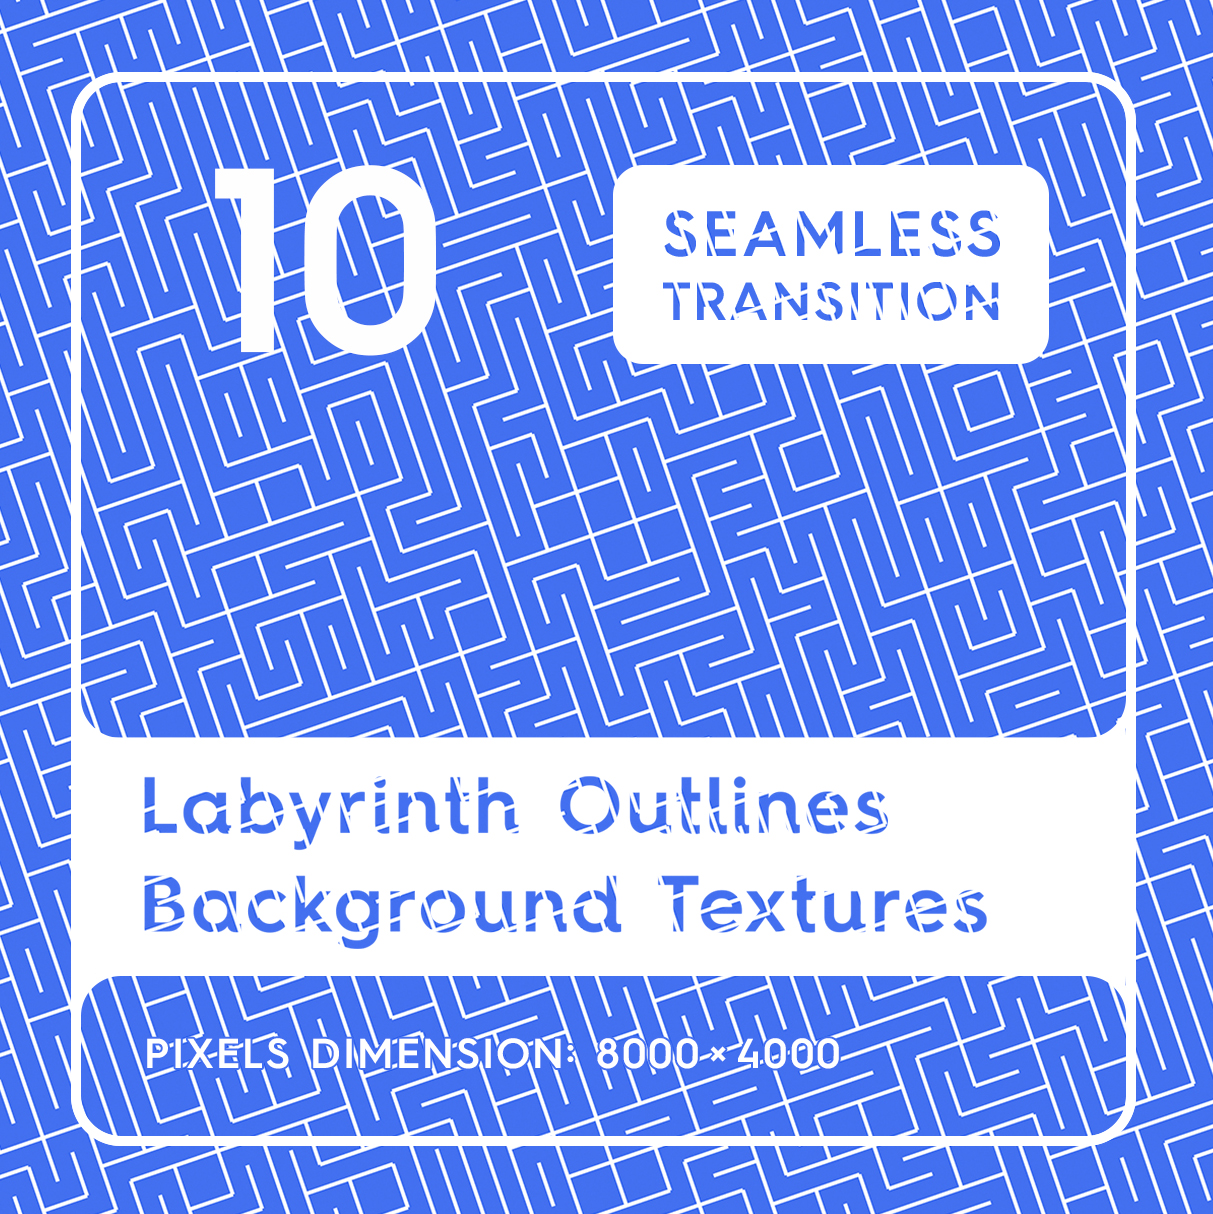 10 Labyrinth Outlines Background Textures